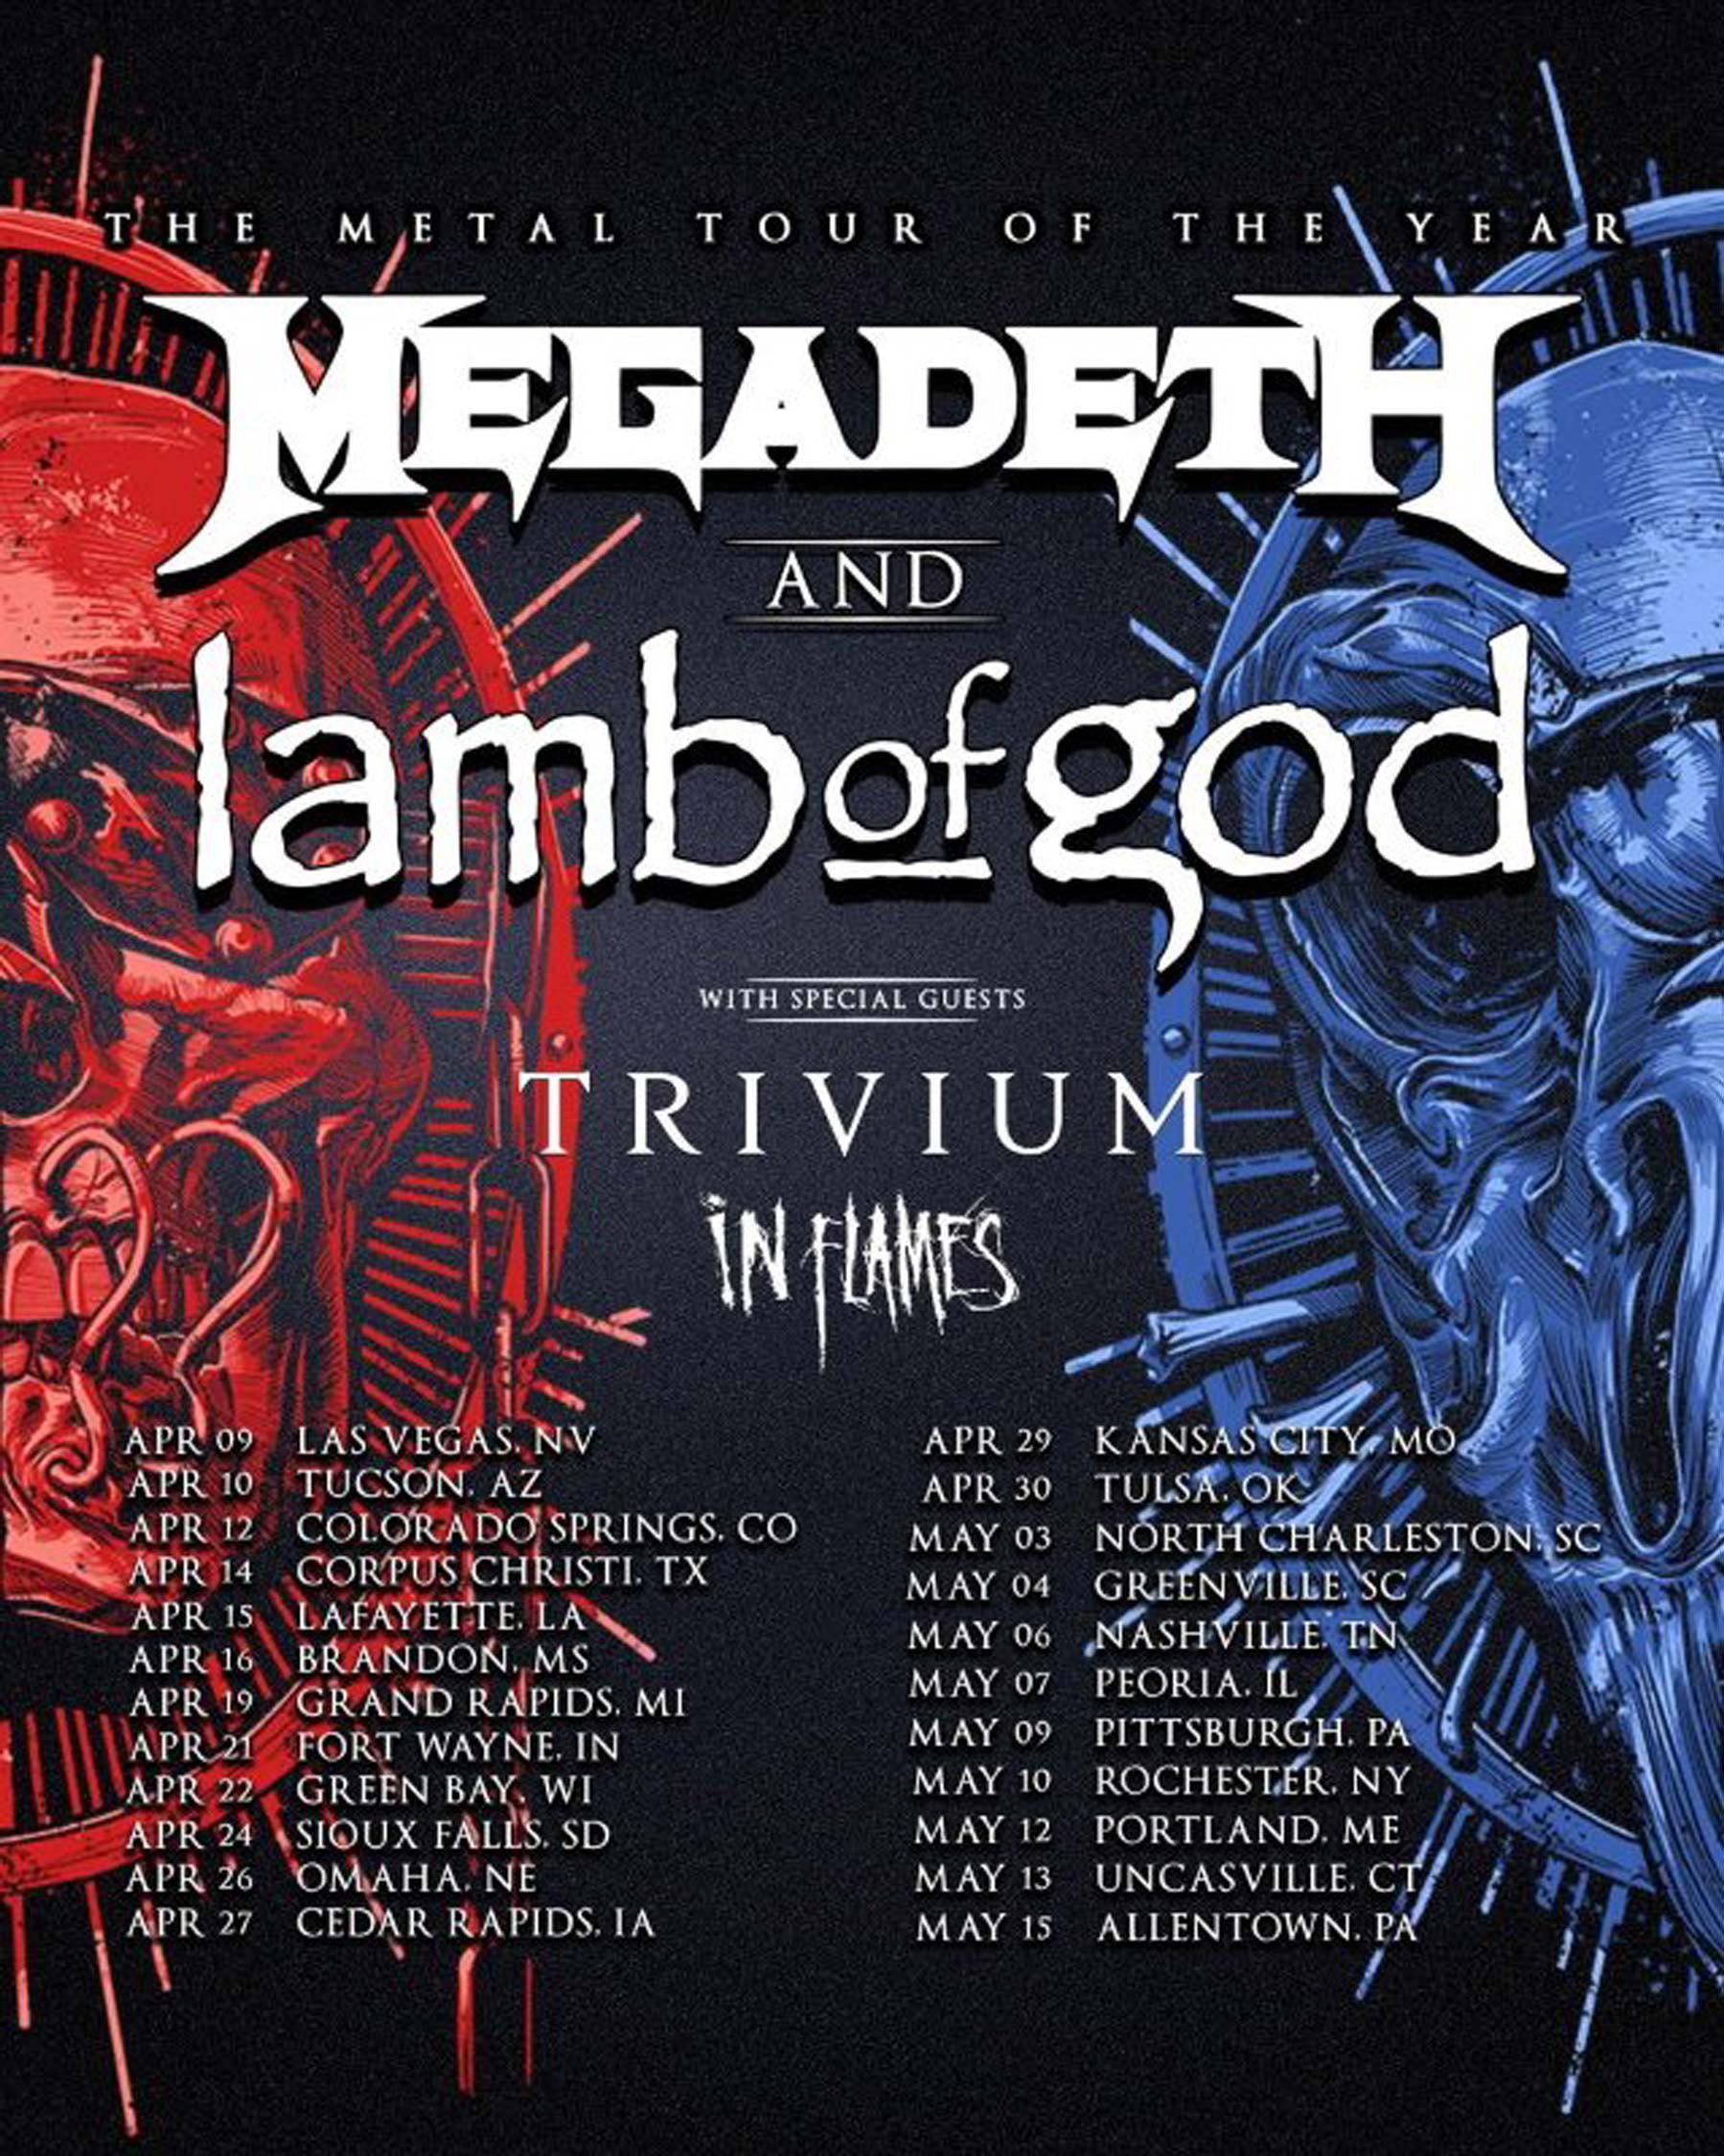 Megadeth Metal Tour of The Year in Greenville South Carolina at the Bon Secours Wellness Arena